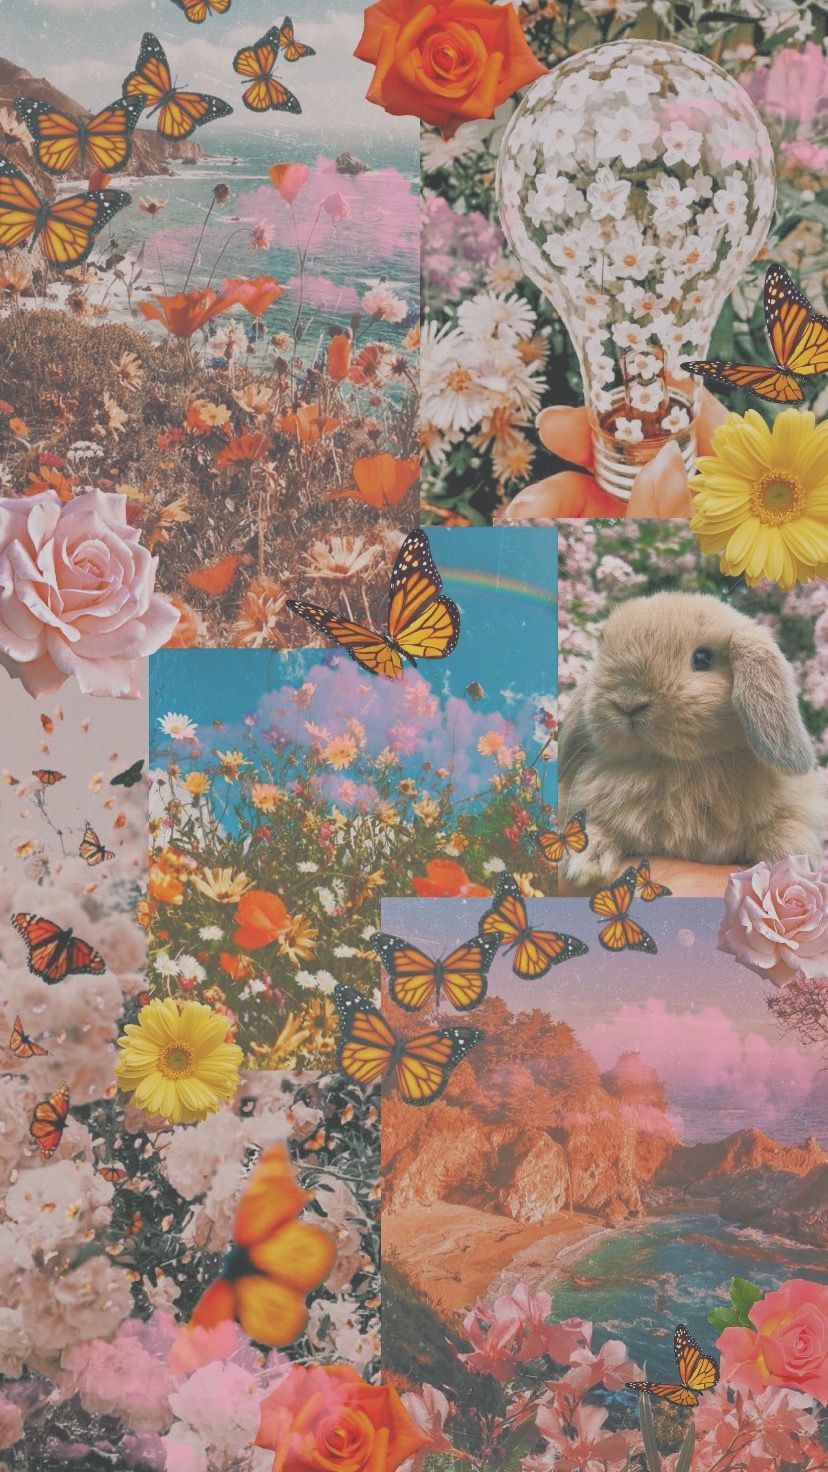 Aesthetic wallpaper for phone with butterfly, rabbit, and flower pictures - Spring